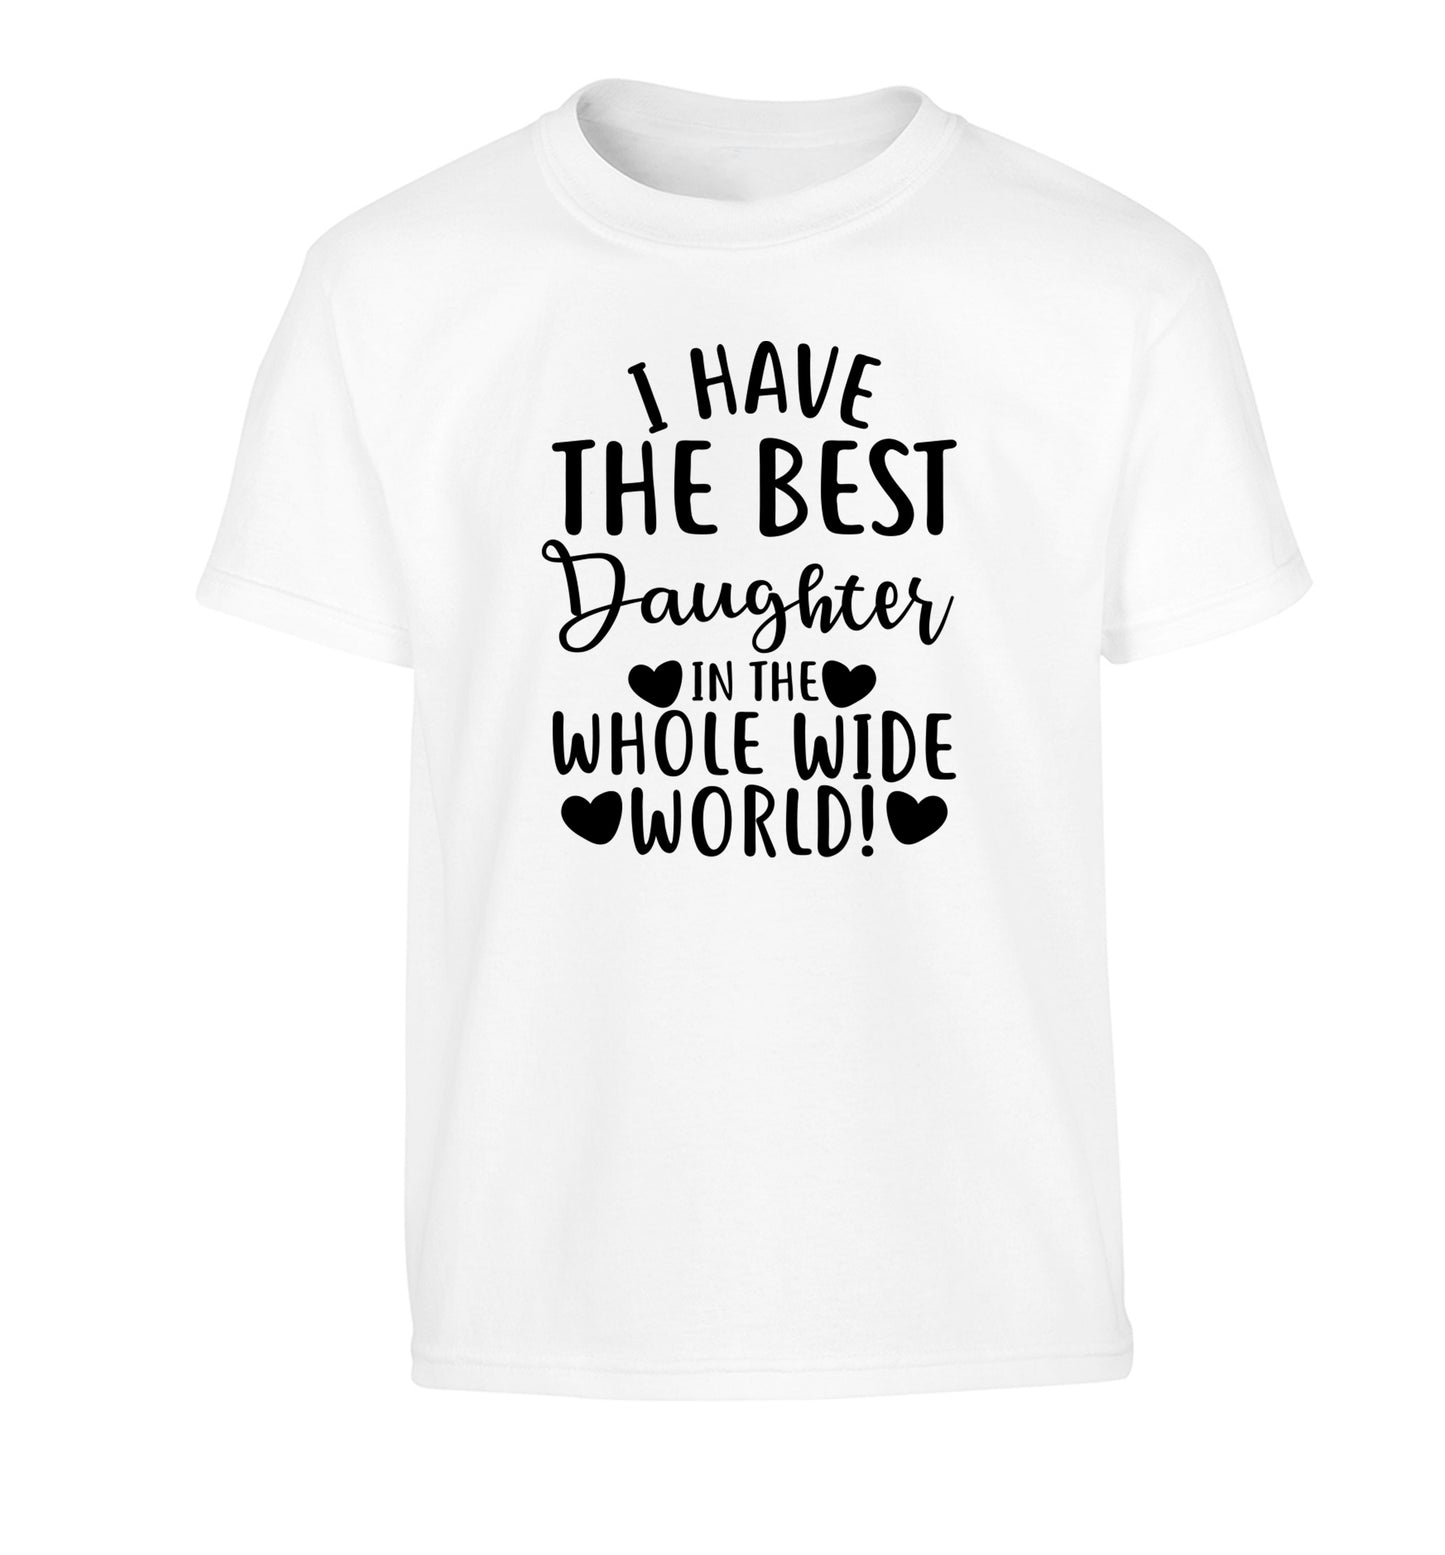 I have the best daughter in the whole wide world! Children's white Tshirt 12-13 Years